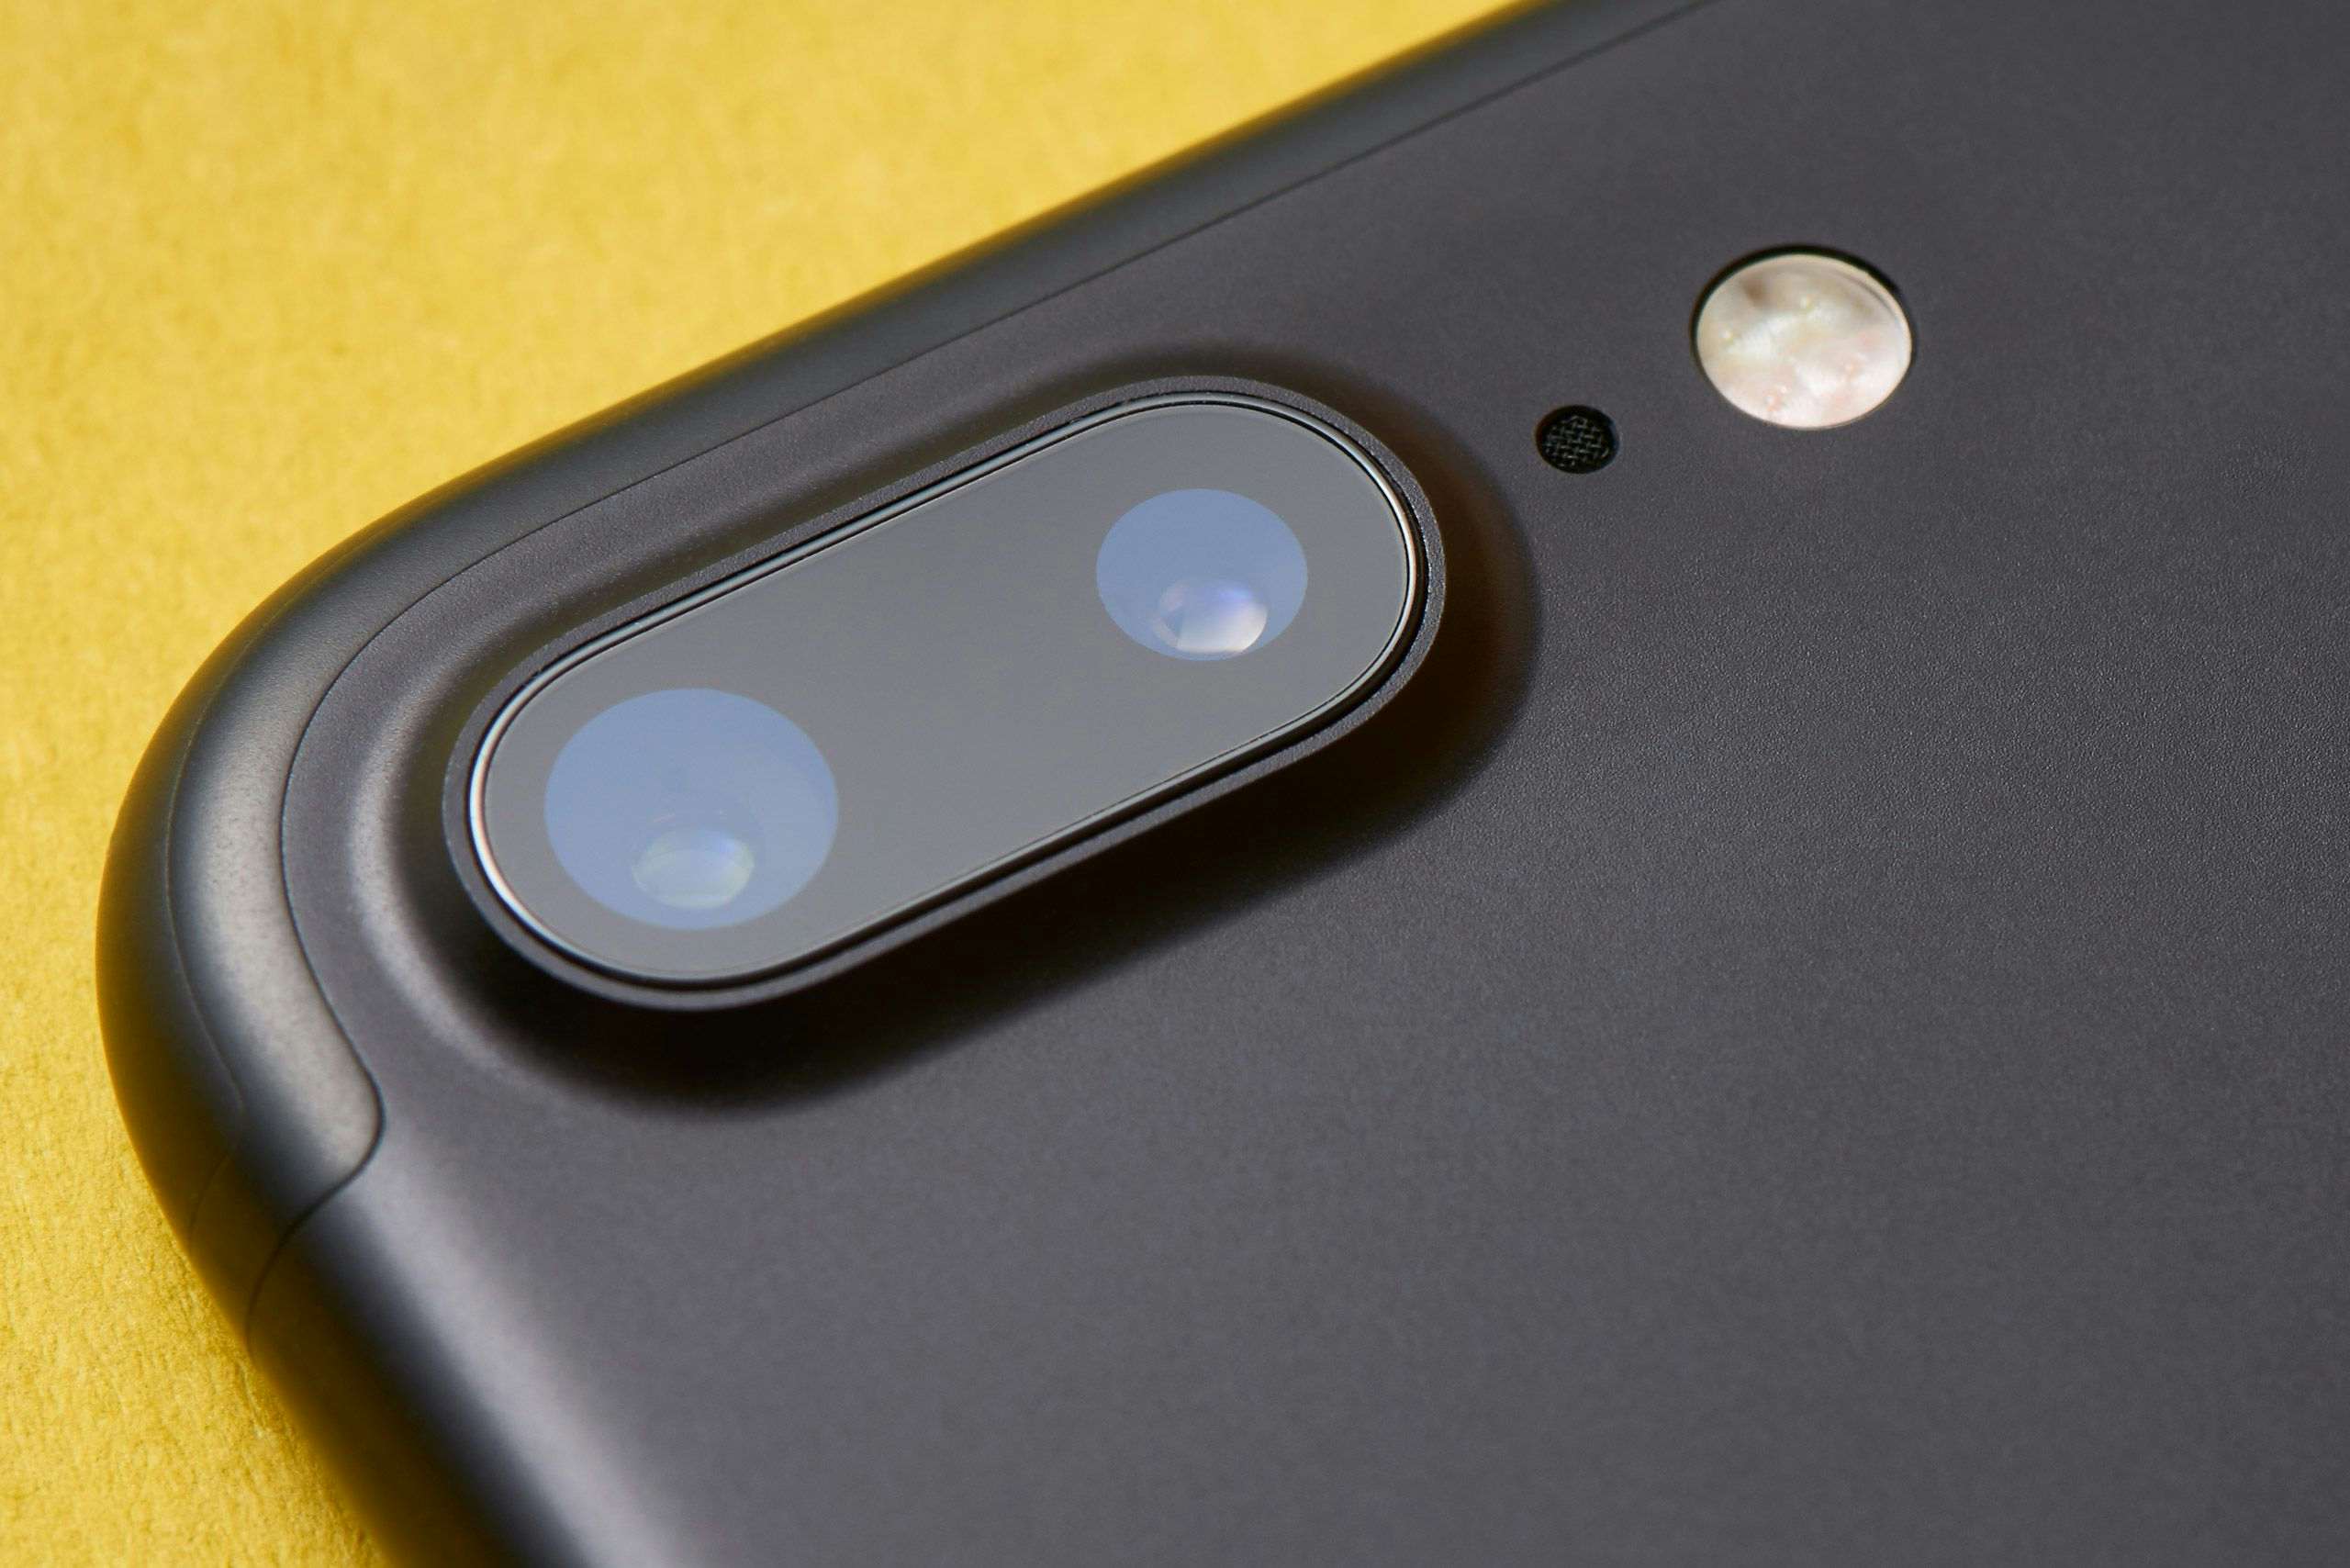 Space gray iPhone 7 Plus dual-camera system and Apple logo close-up. Photography by Xavier Wendling.